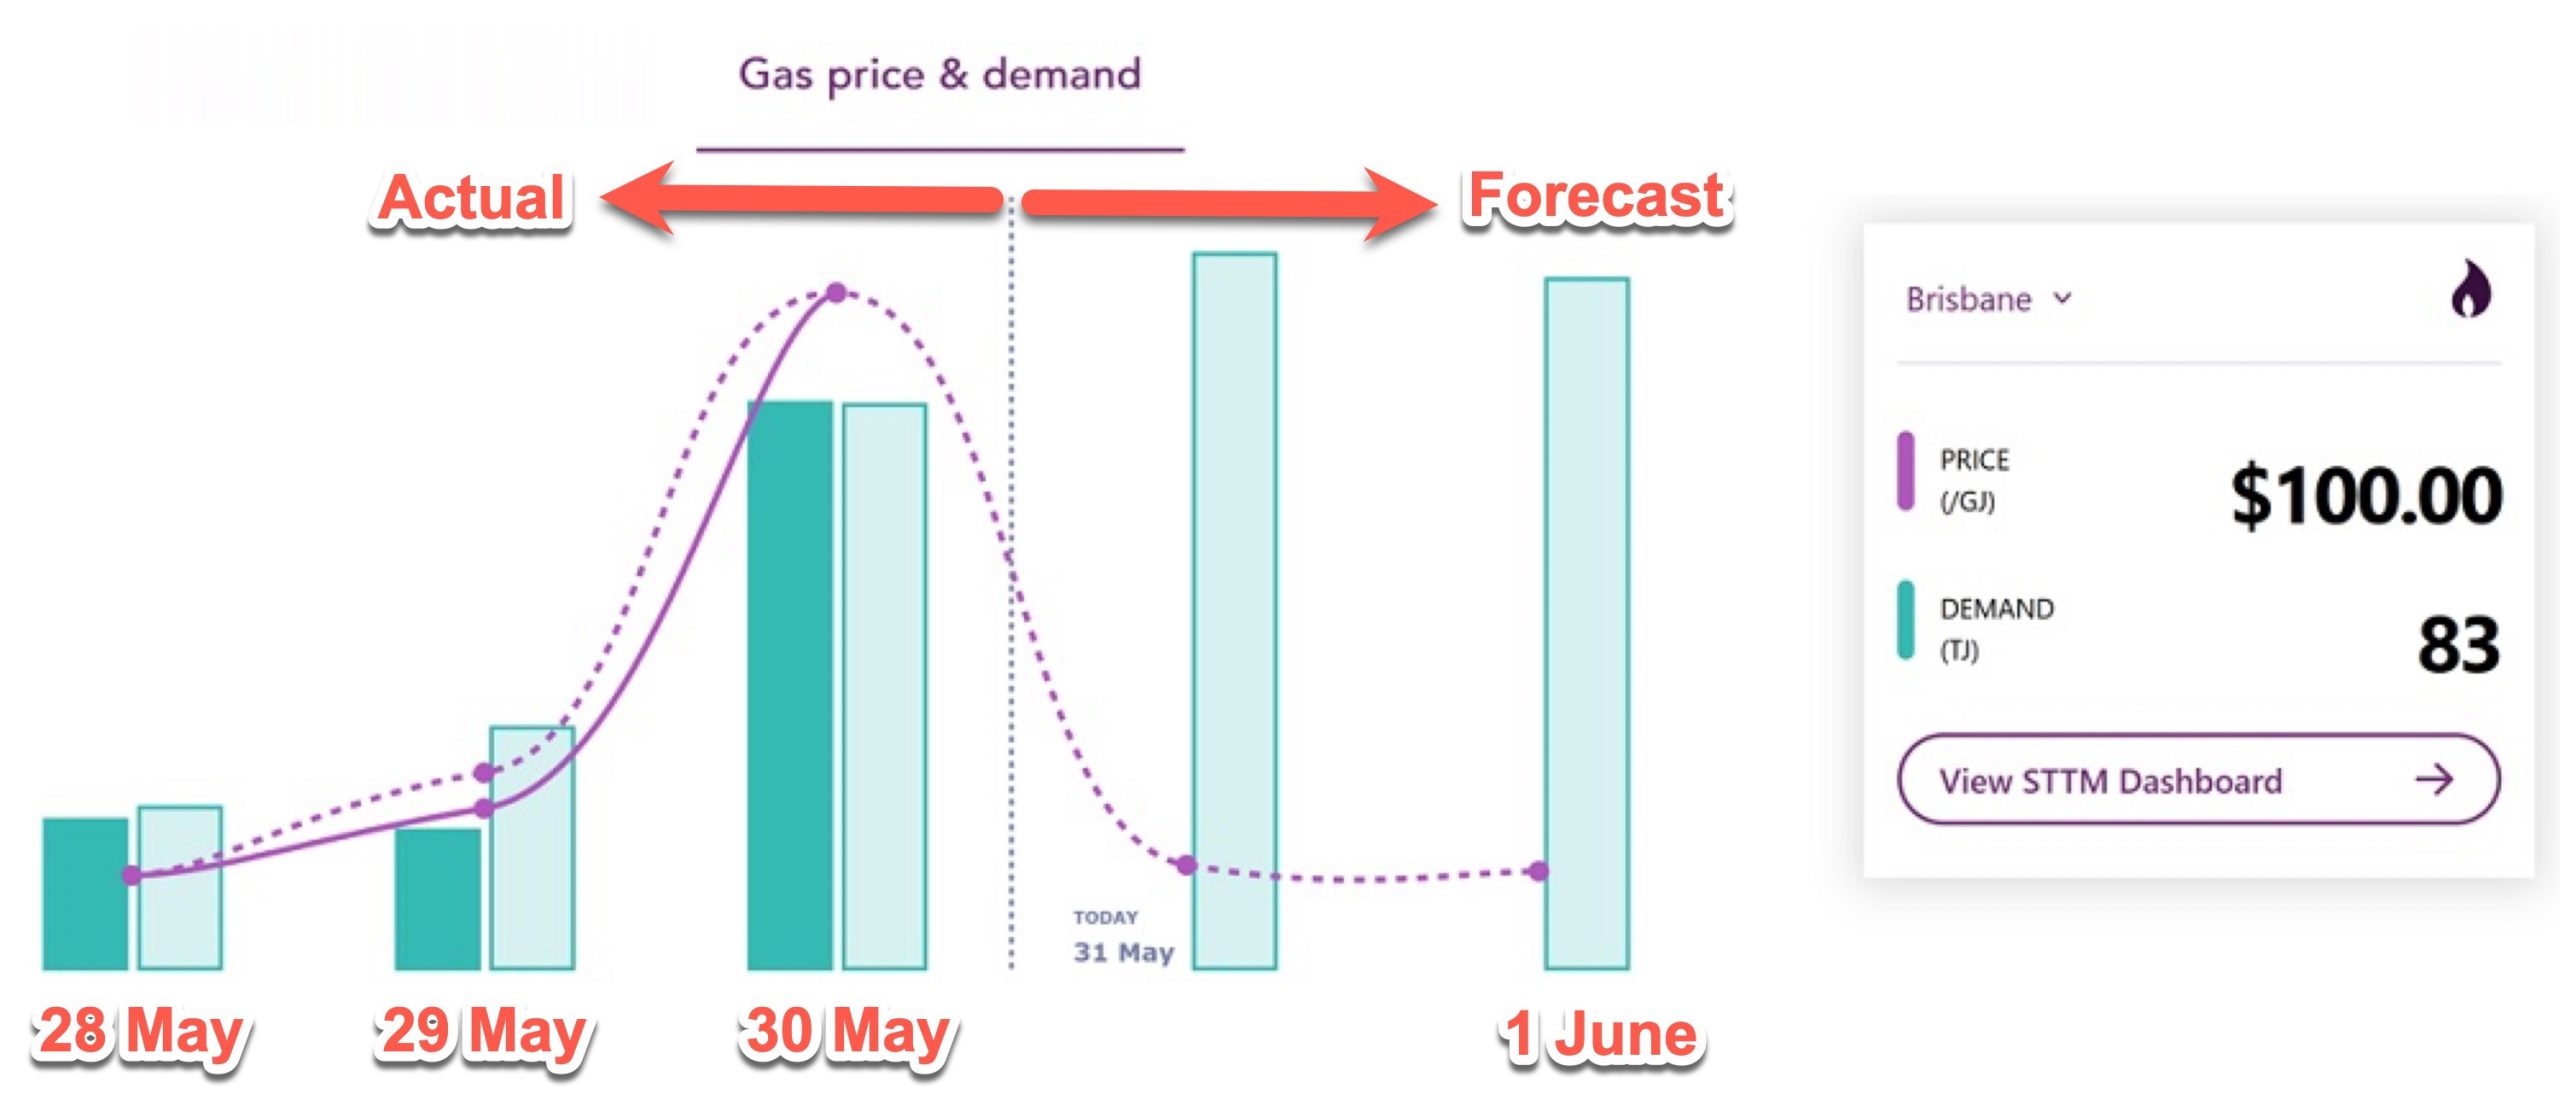 Gas price and demand